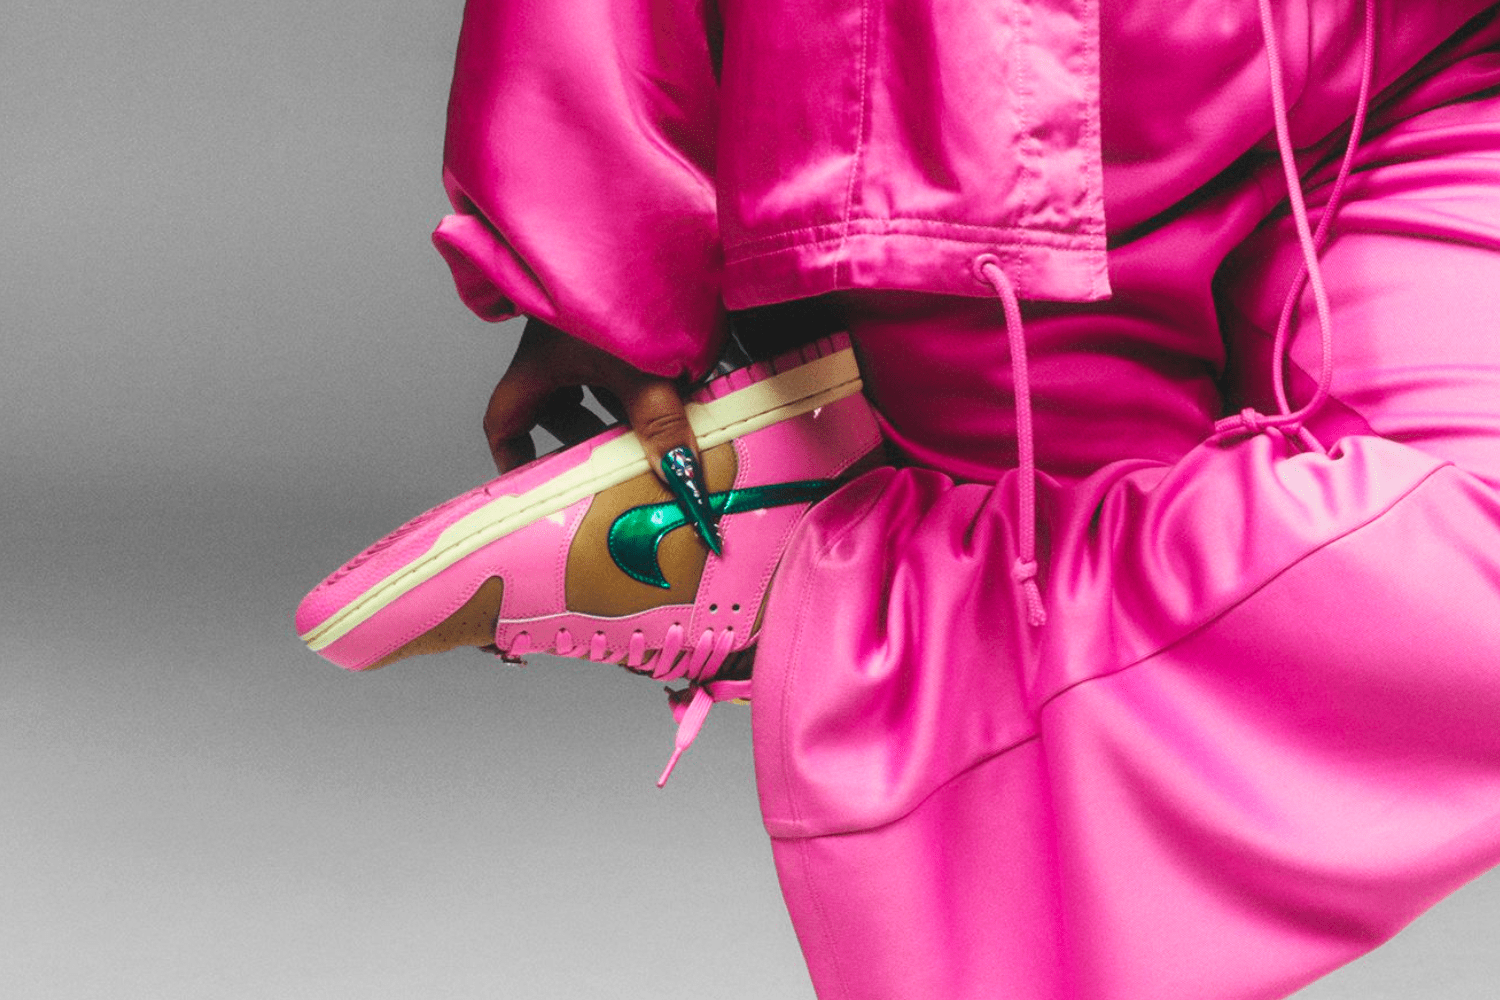 Dance in style with Parris Goebel and the Nike Dunk Low 'Playful Pink'